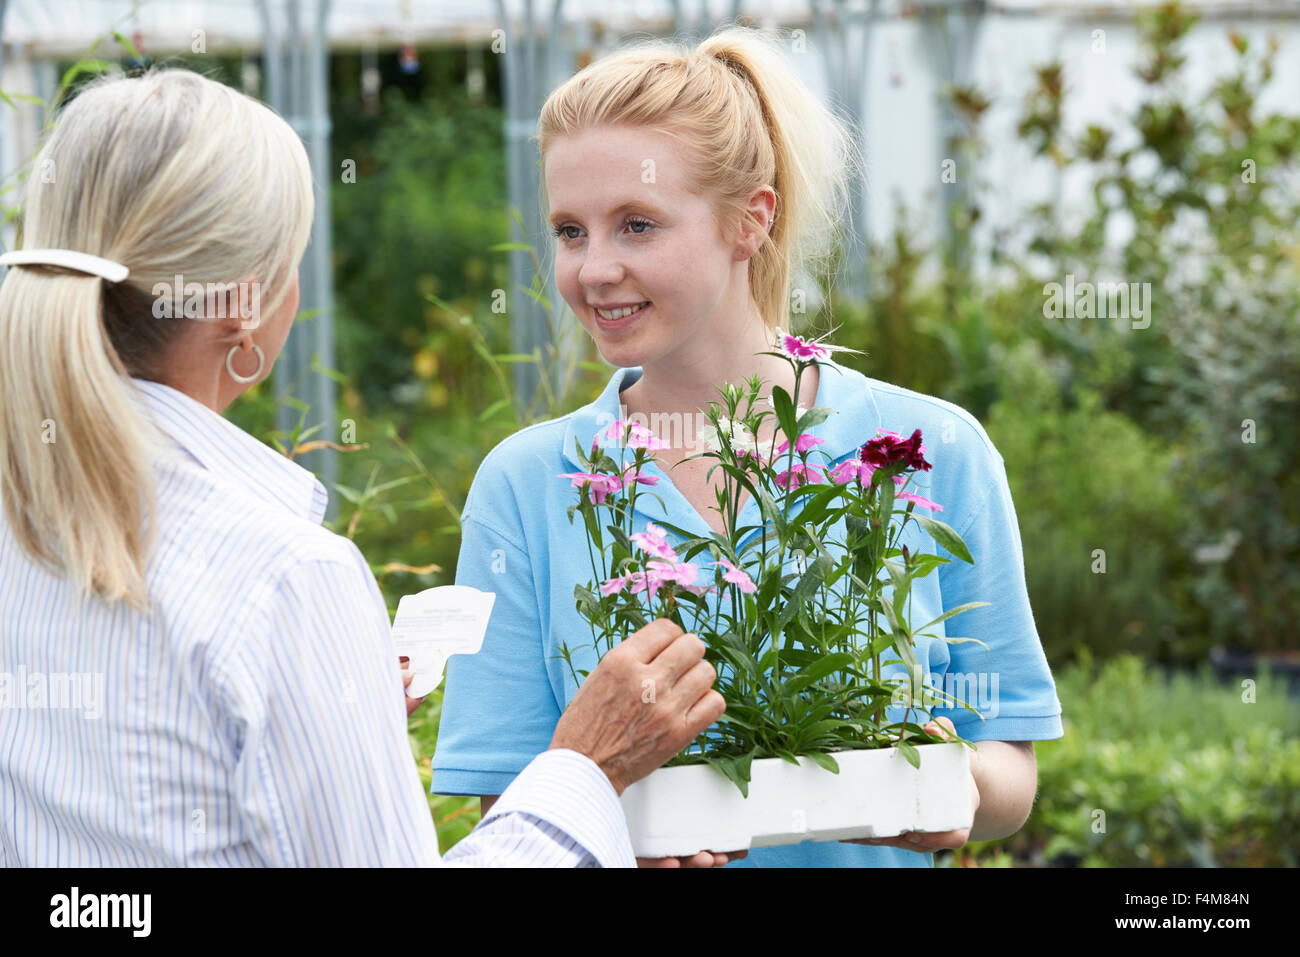 Staff Giving Plant Advice To Female Customer At Garden Center Stock Photo